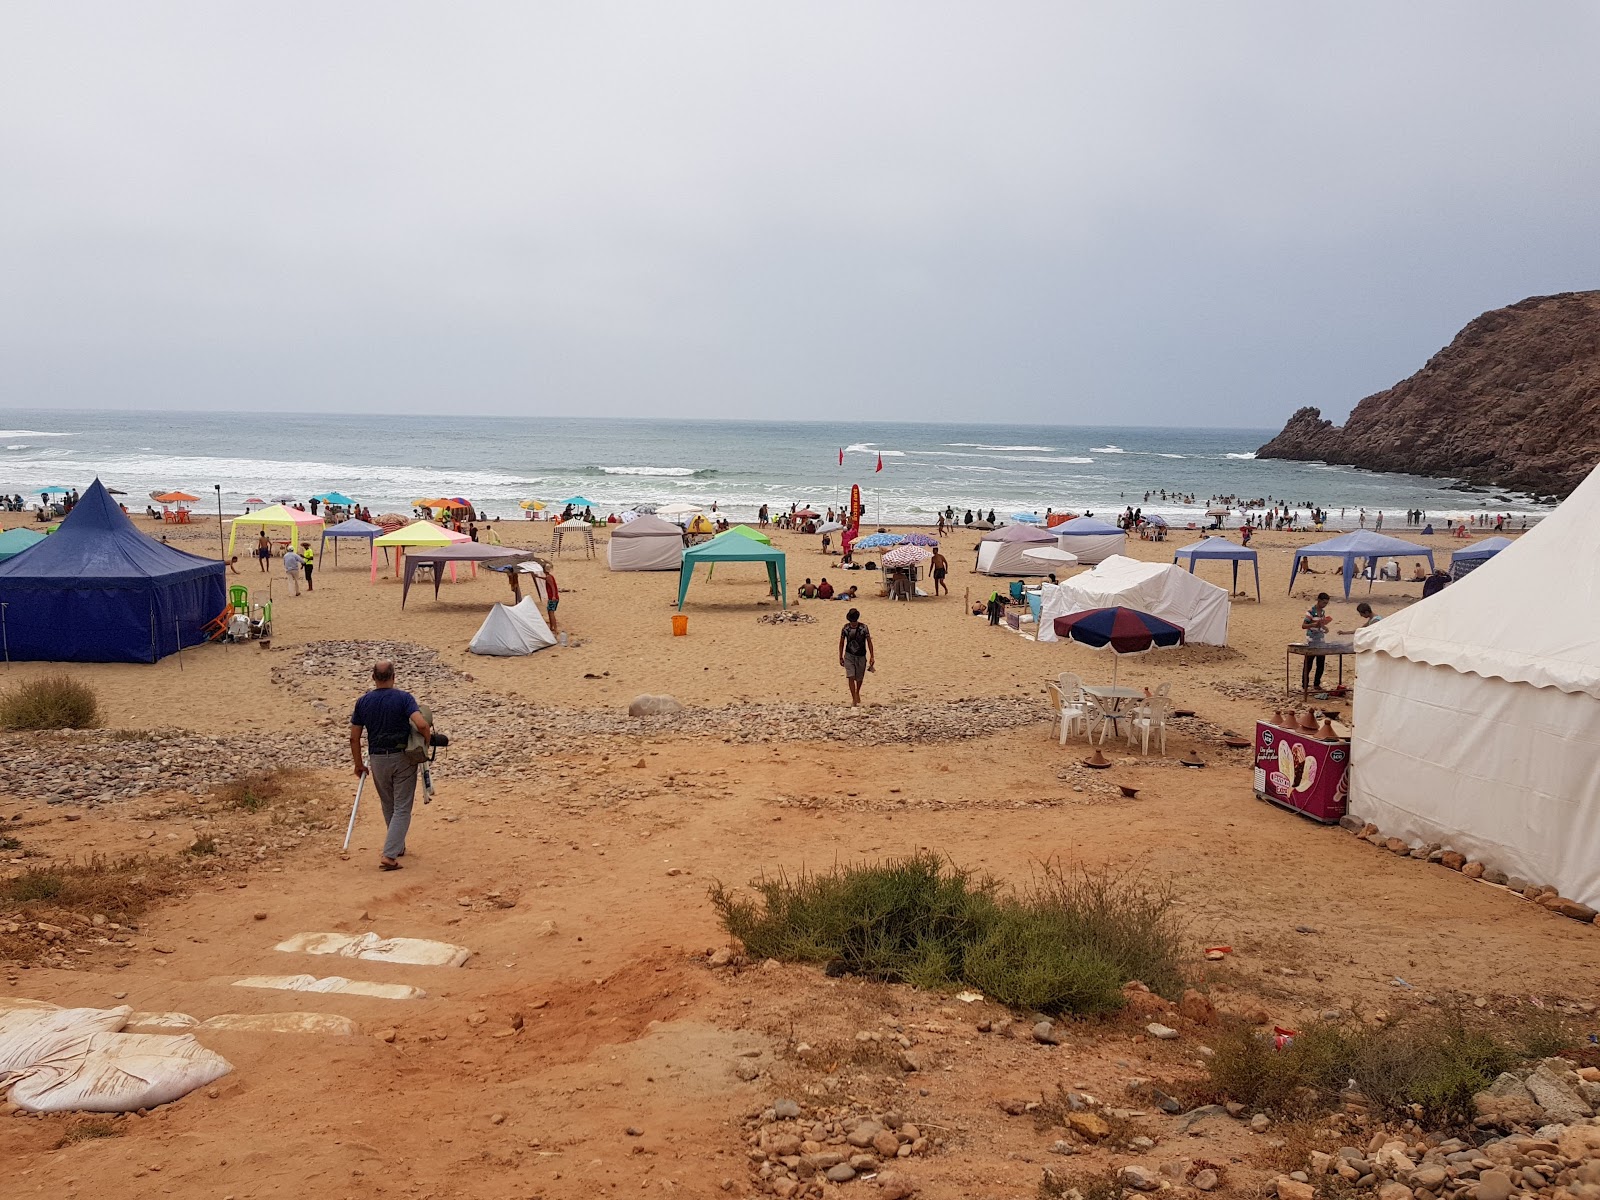 Photo of Plage Sidi Mohammed Ben Abdellah backed by cliffs